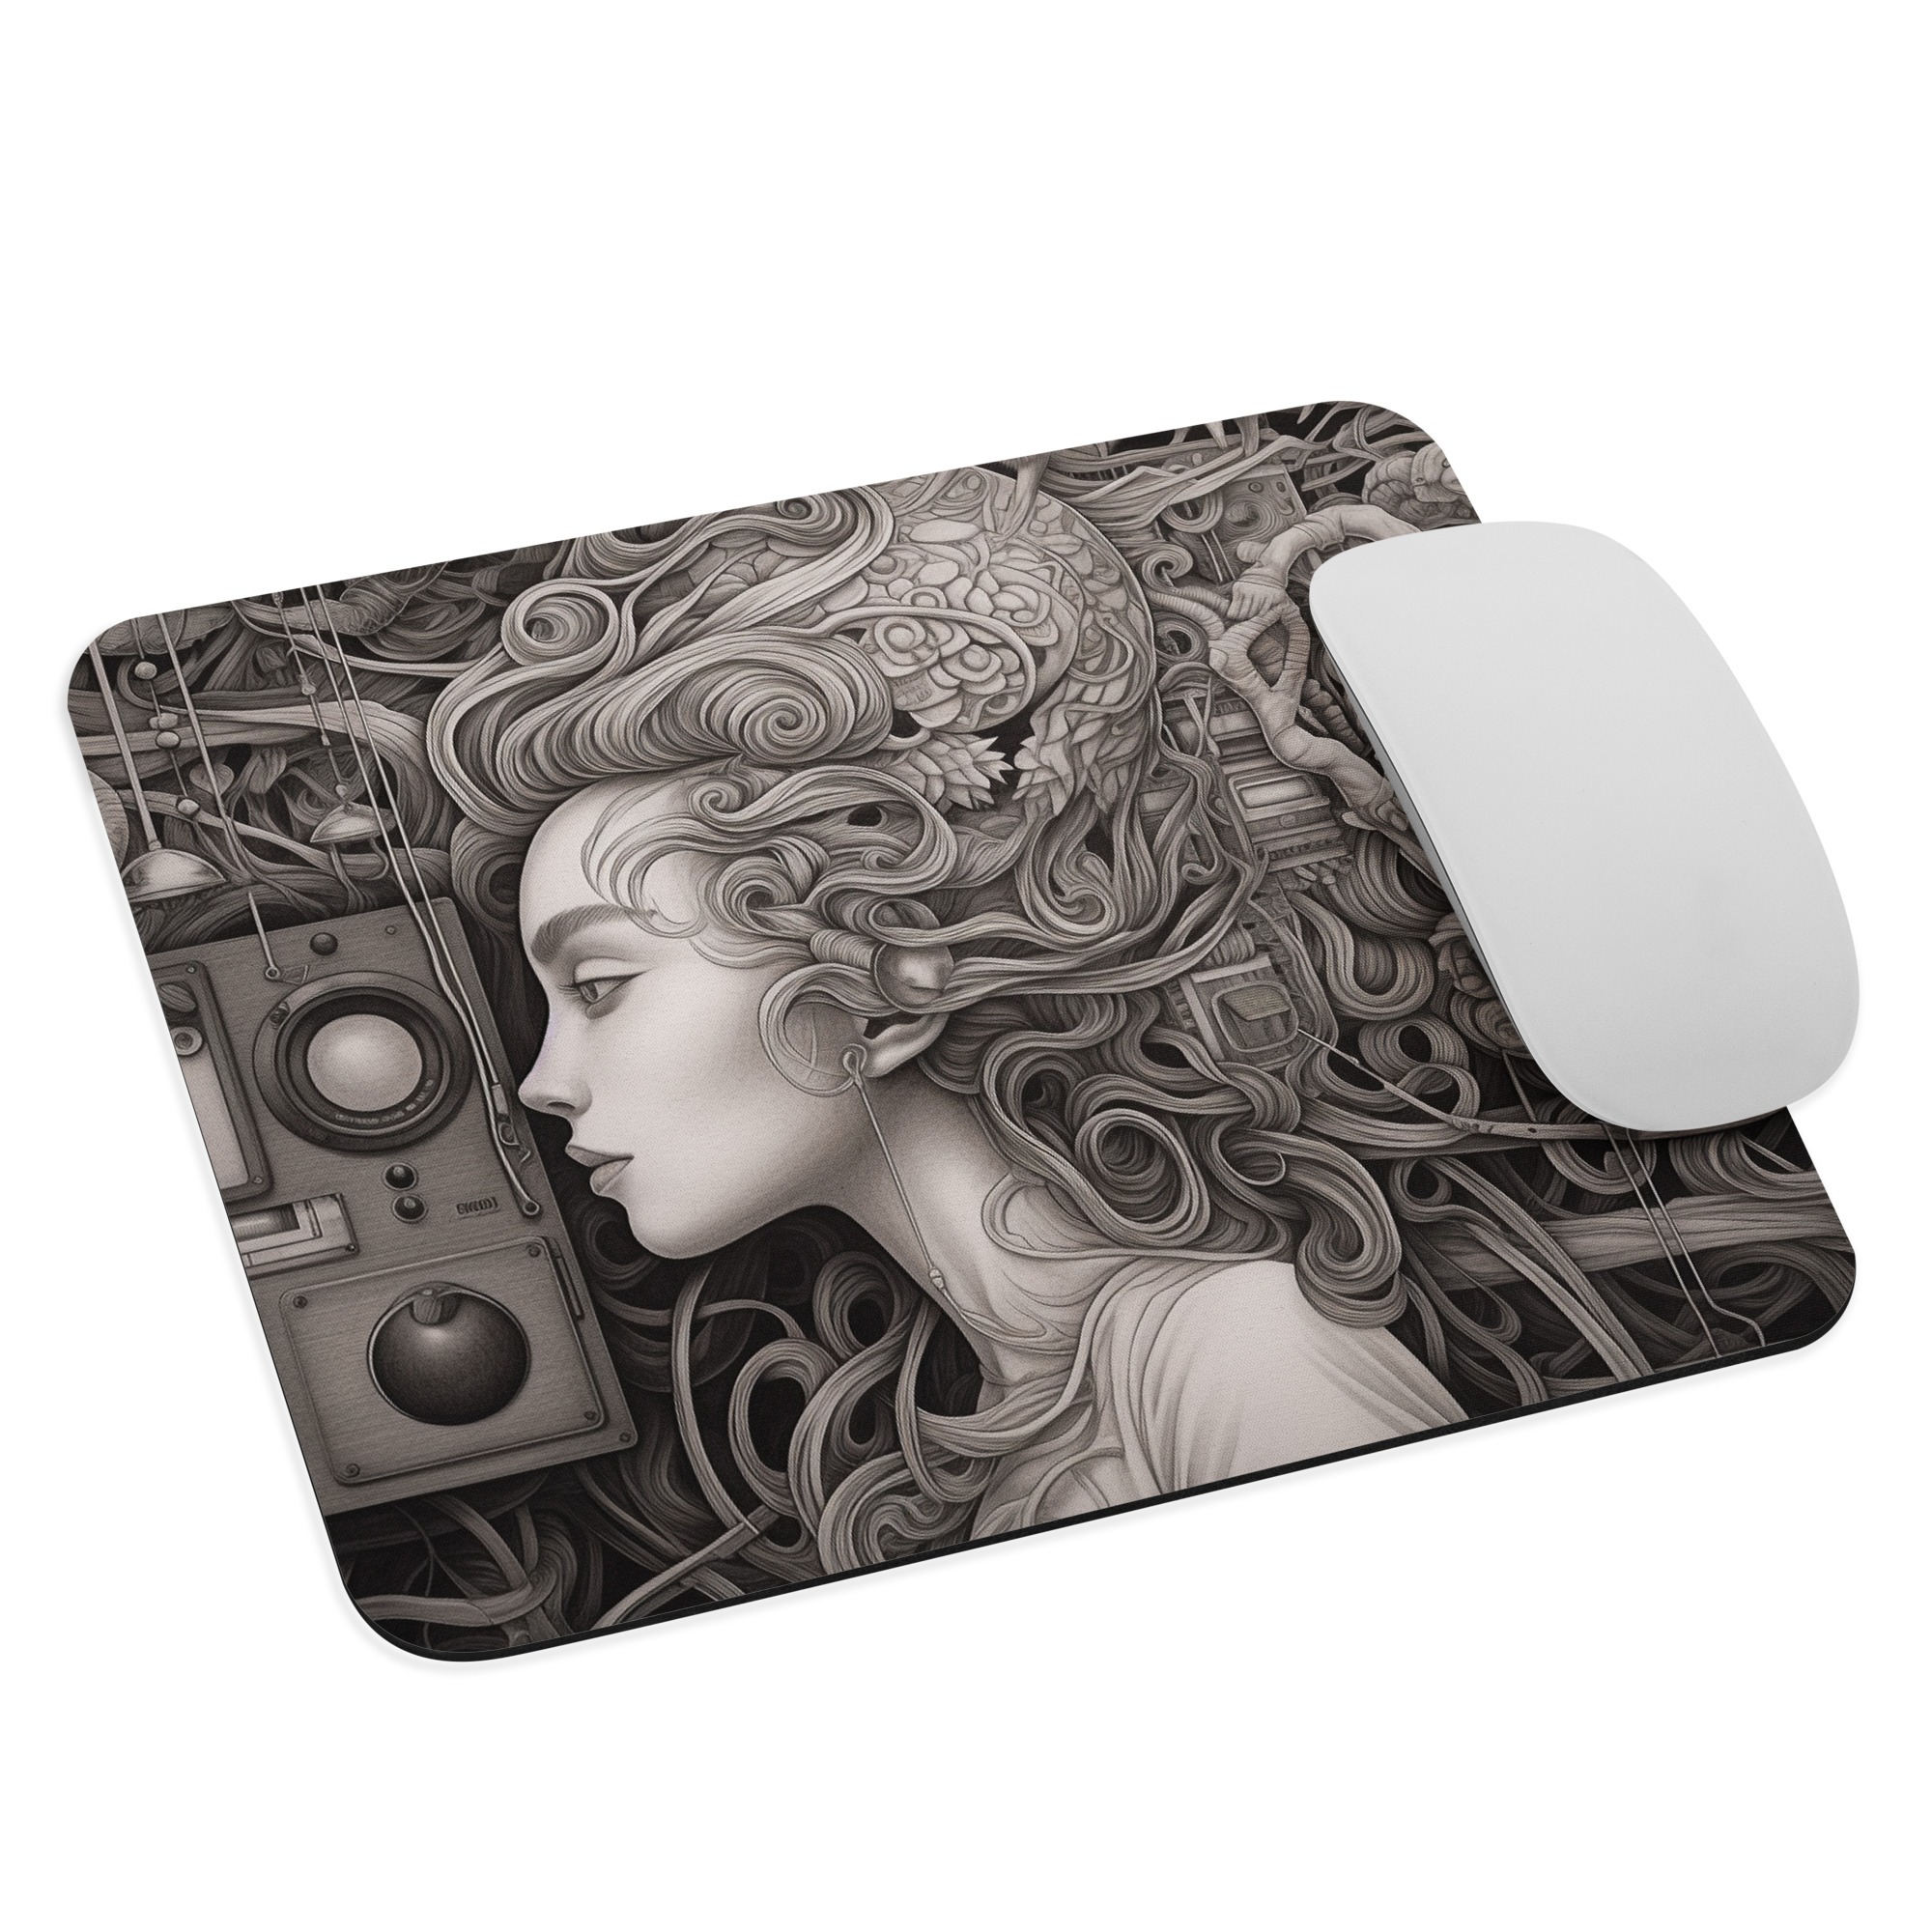 Tangled in Compulsion | Inspired by Binge Watching TV Shows | Fantasy Artwork |  Mouse pad